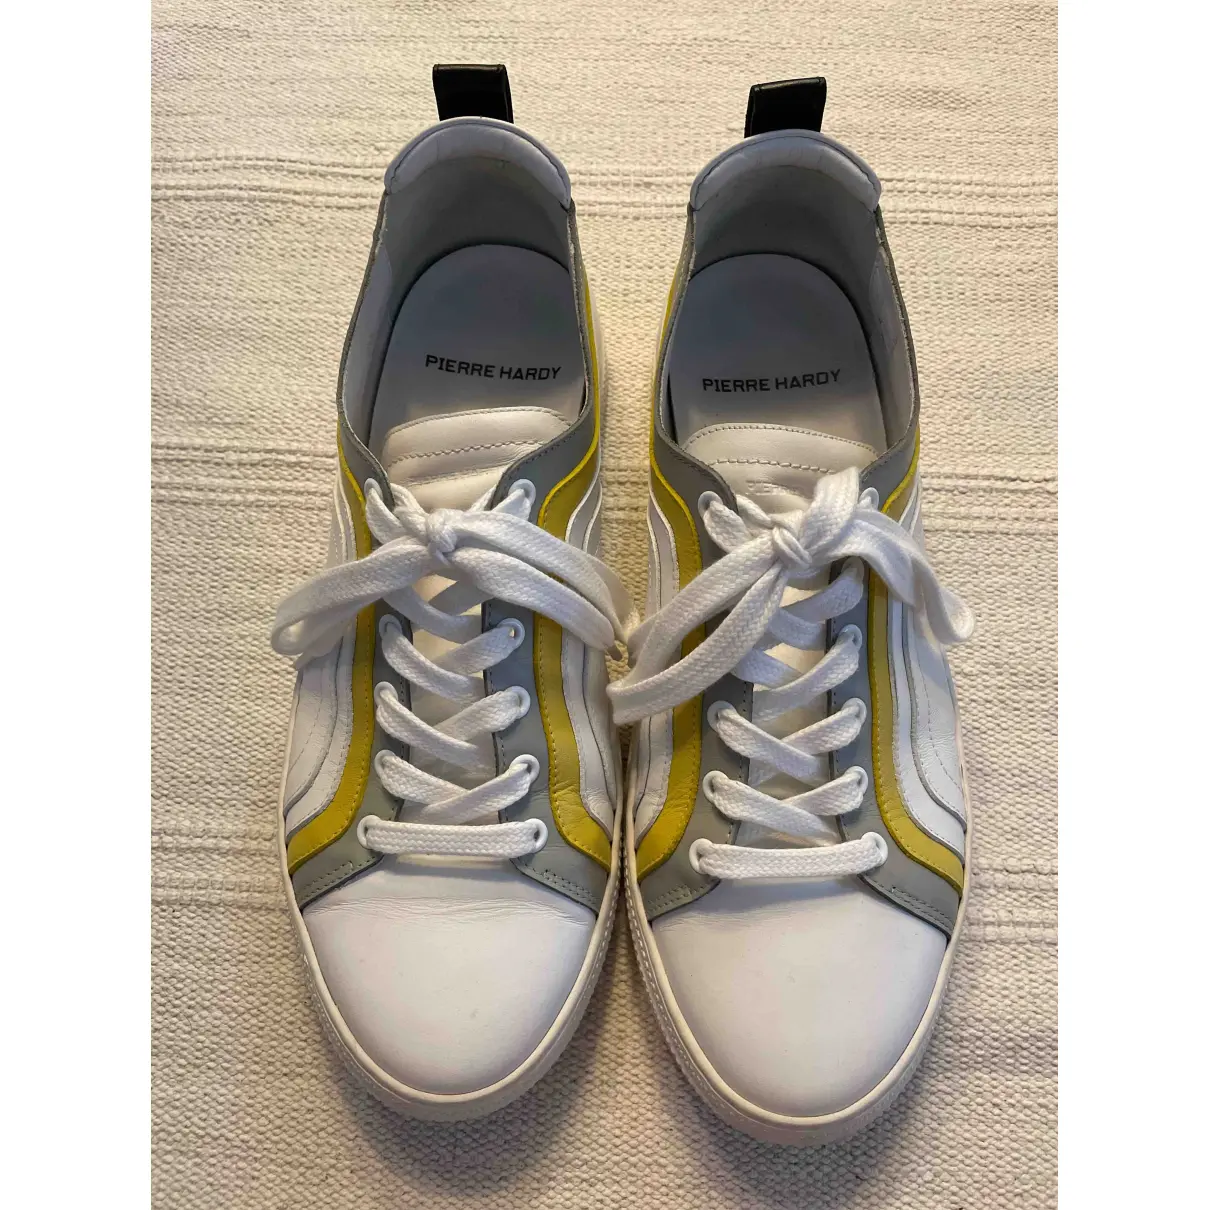 Buy Pierre Hardy Leather low trainers online